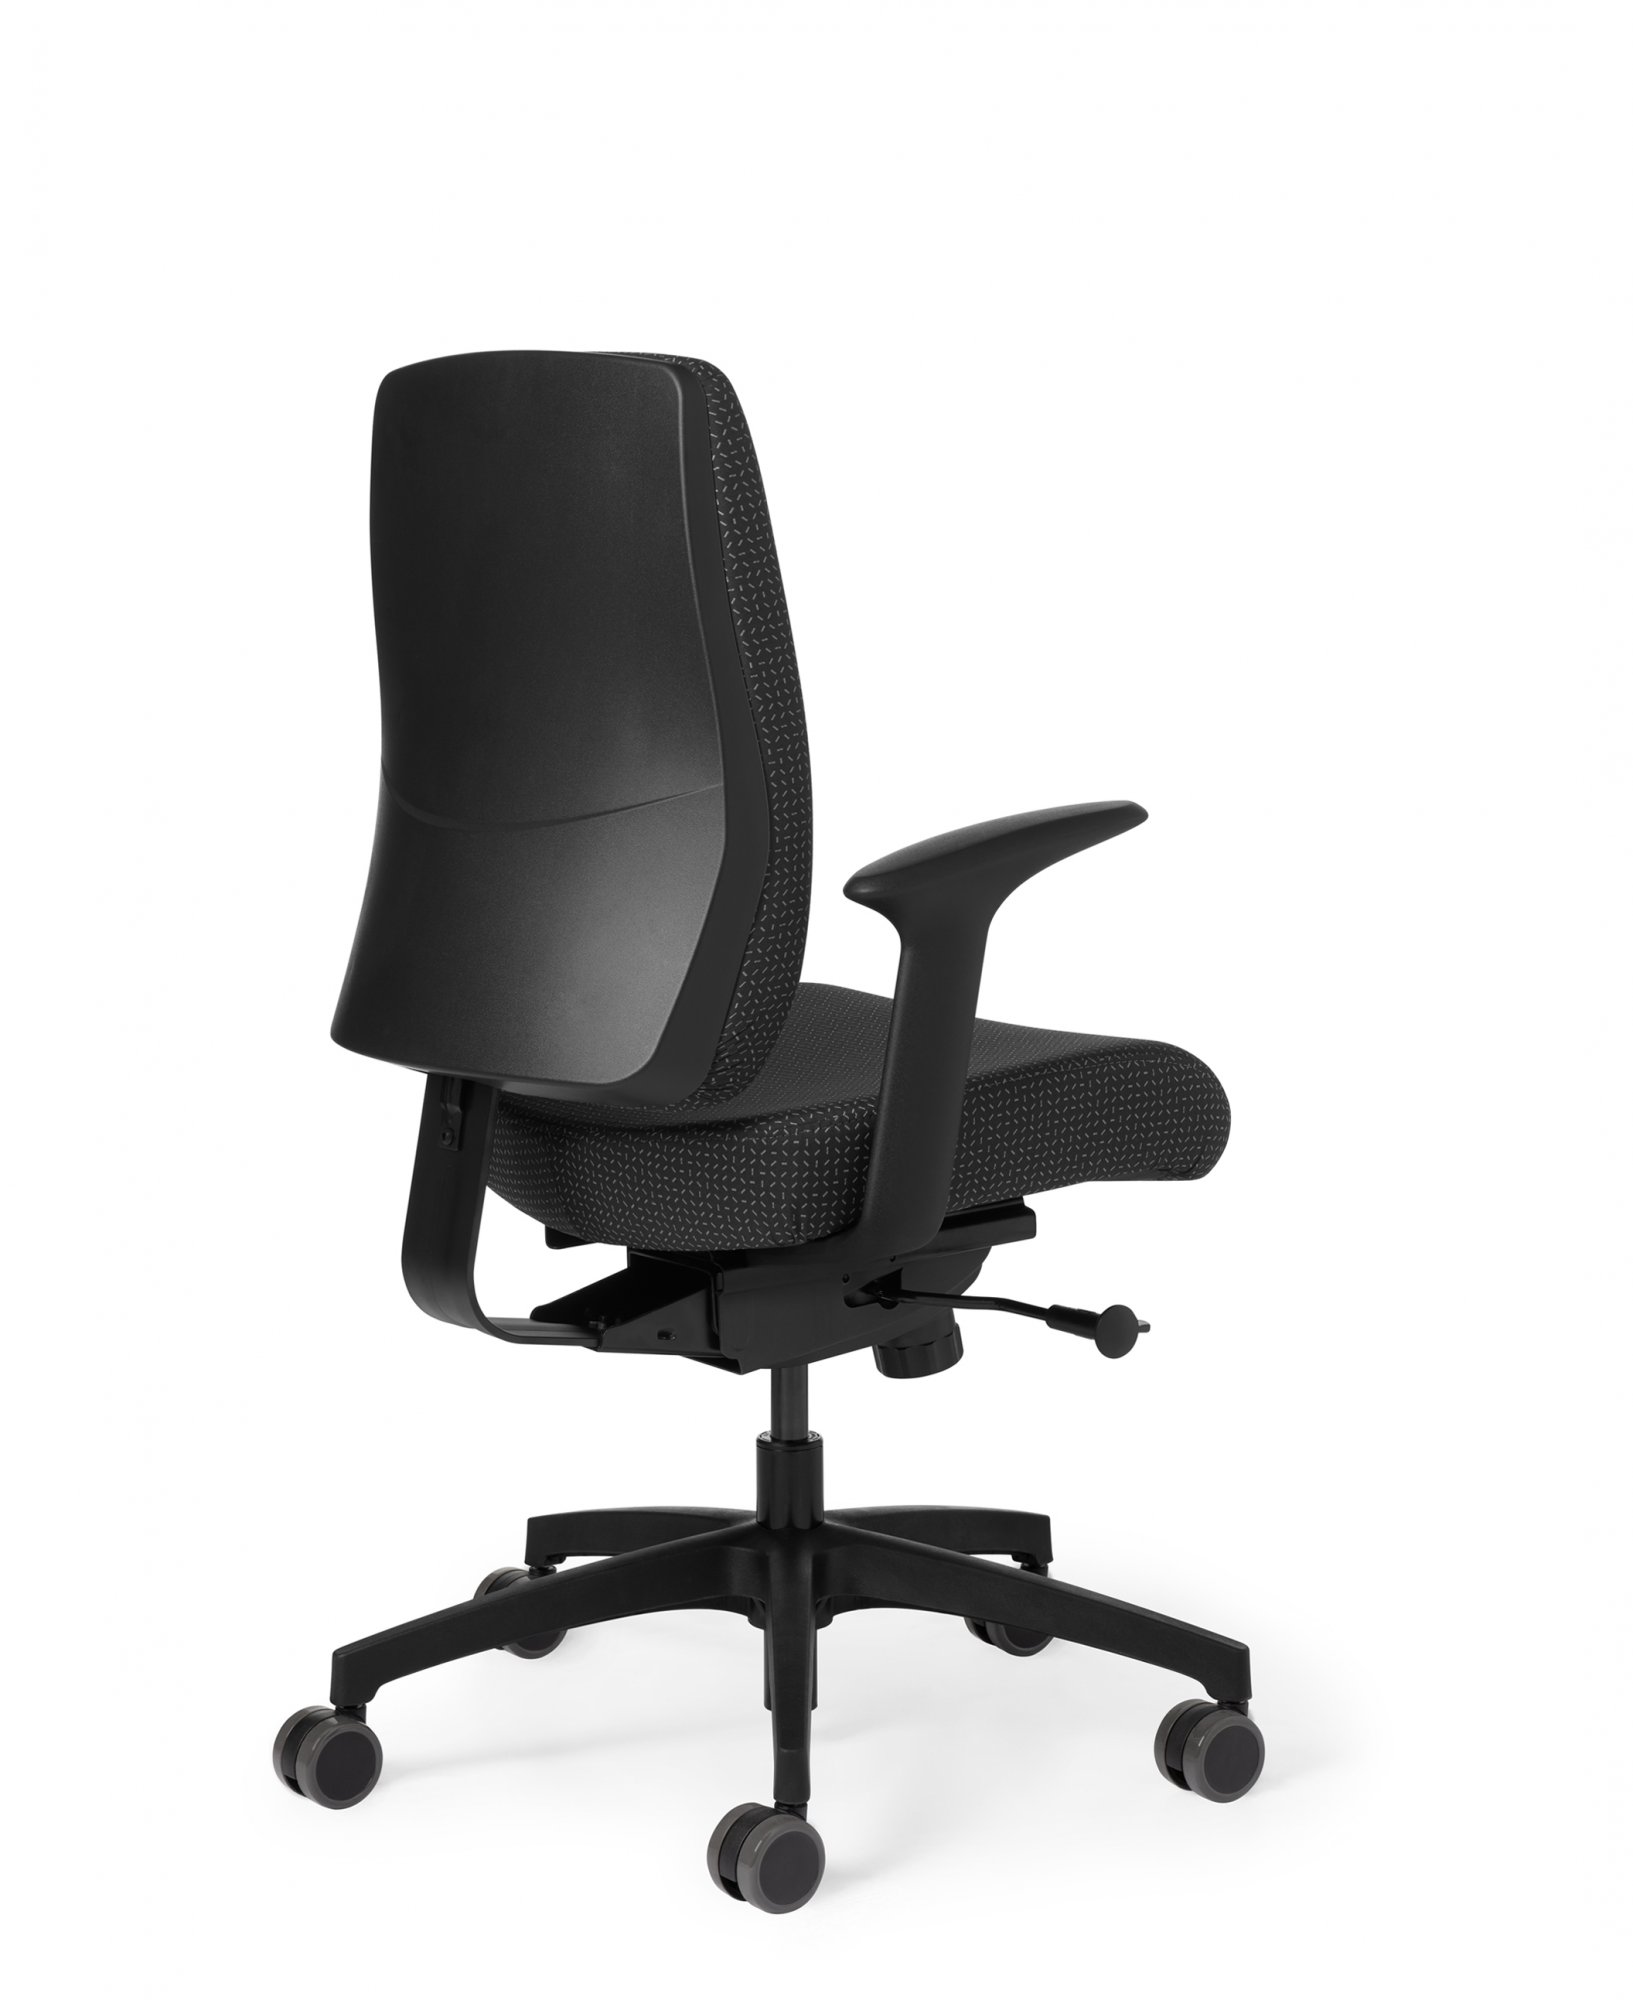 Side view of Office Master AF408 Simple Synchro Affirm Chair